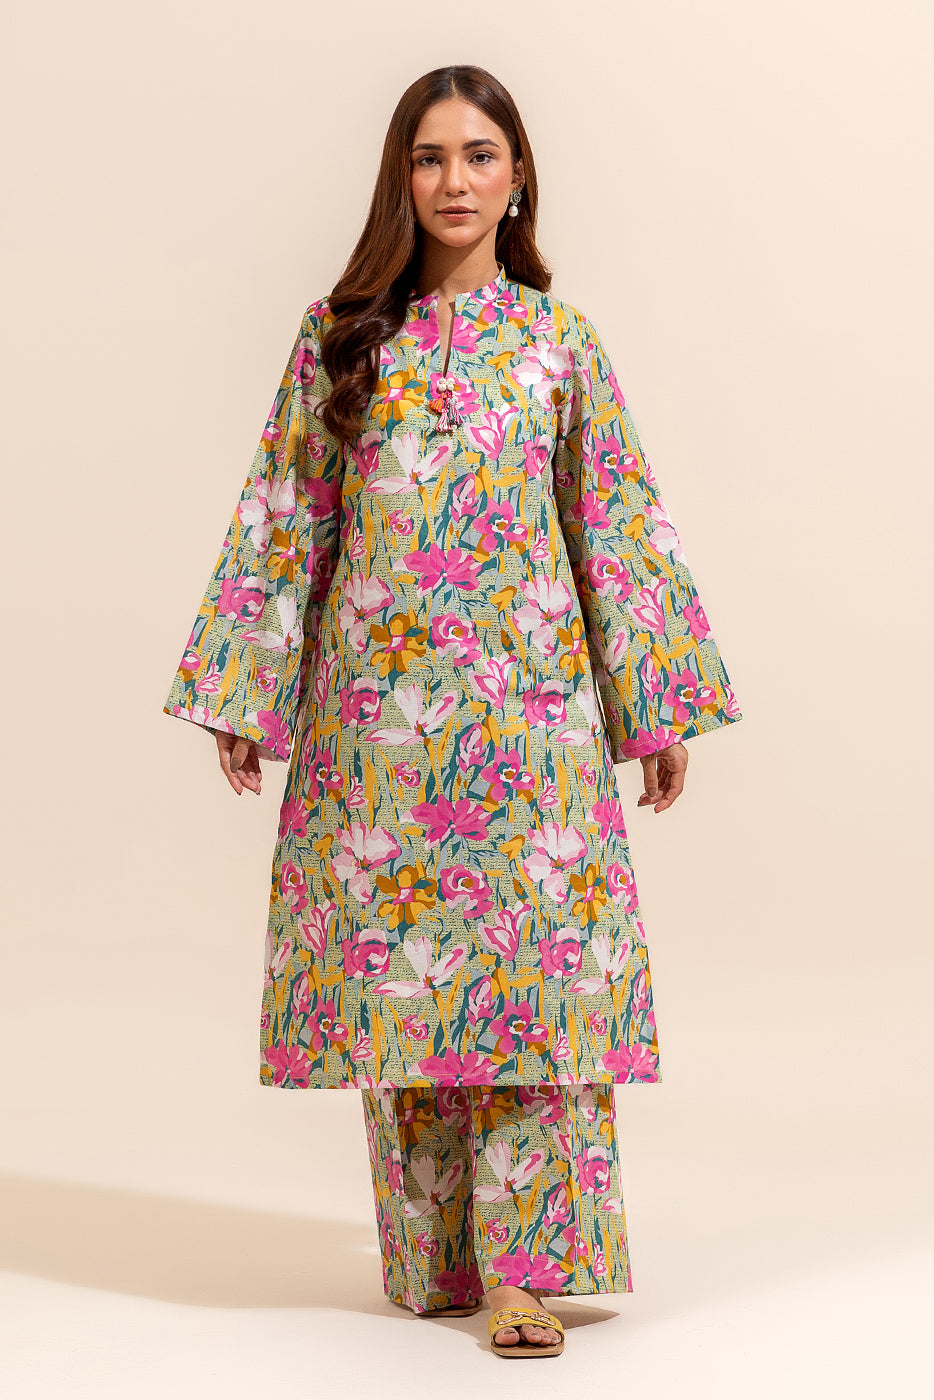 2 PIECE PRINTED LAWN SUIT-PEONY GARLAND (UNSTITCHED)